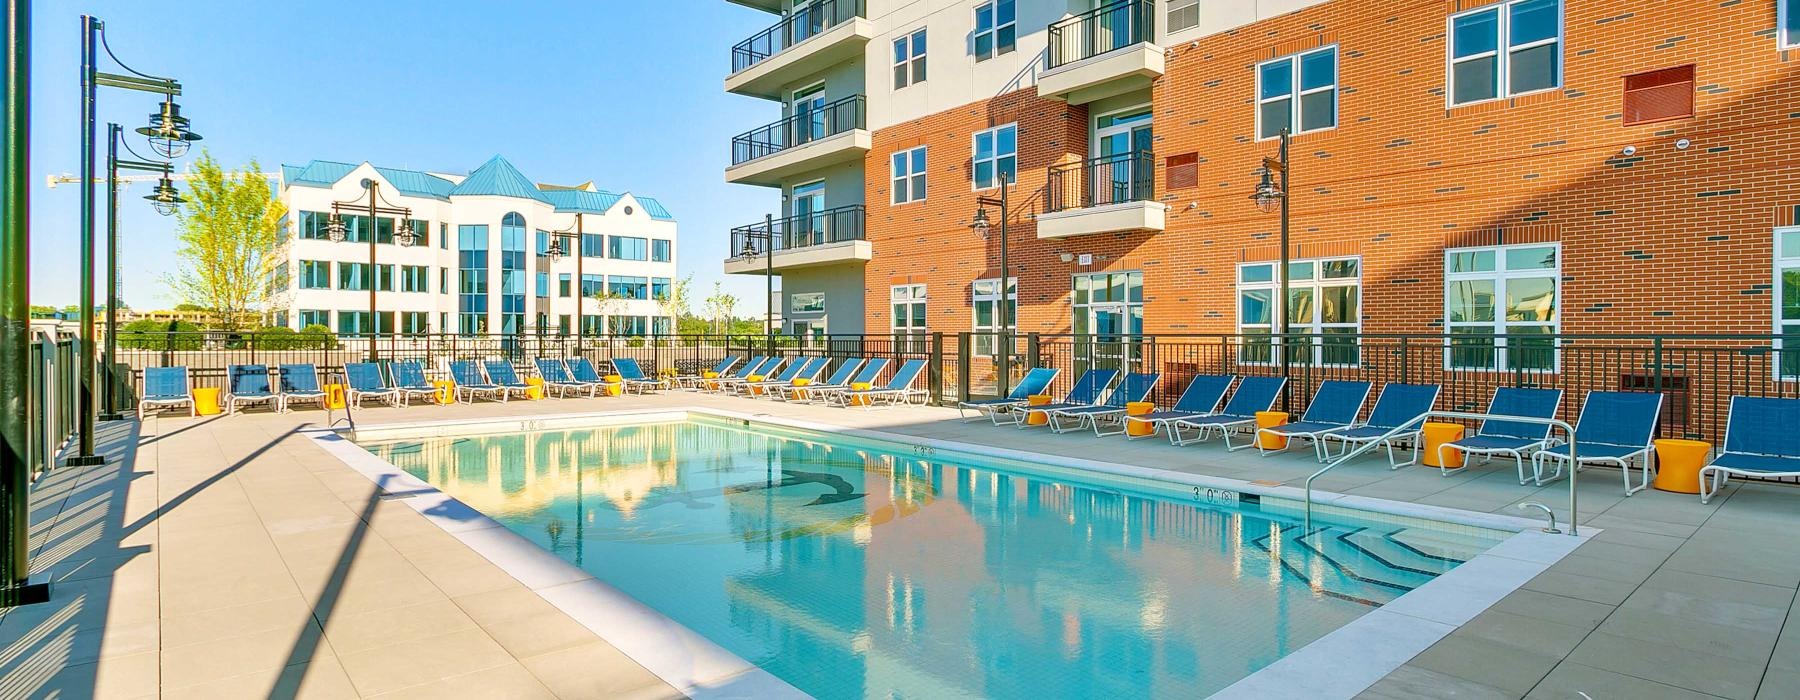 The pool area at our apartments for rent in Stamford, CT, featuring beach chairs and a view of the apartment complex.